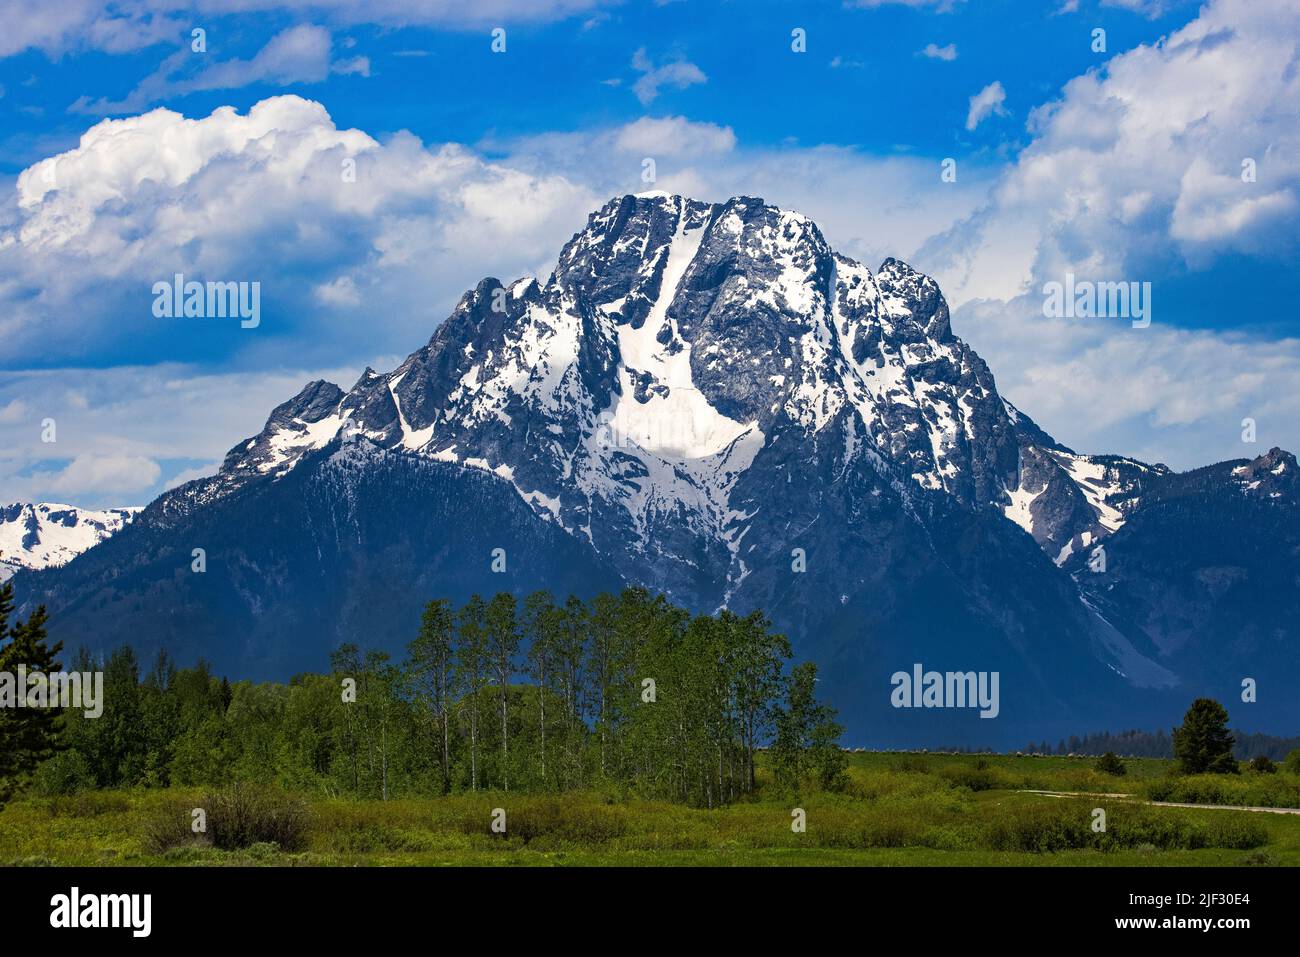 This is a view of Mount Moran, a landmark mountain on the north end of the Teton Range in Grand Teton National Park, Wyoming, USA. Stock Photo